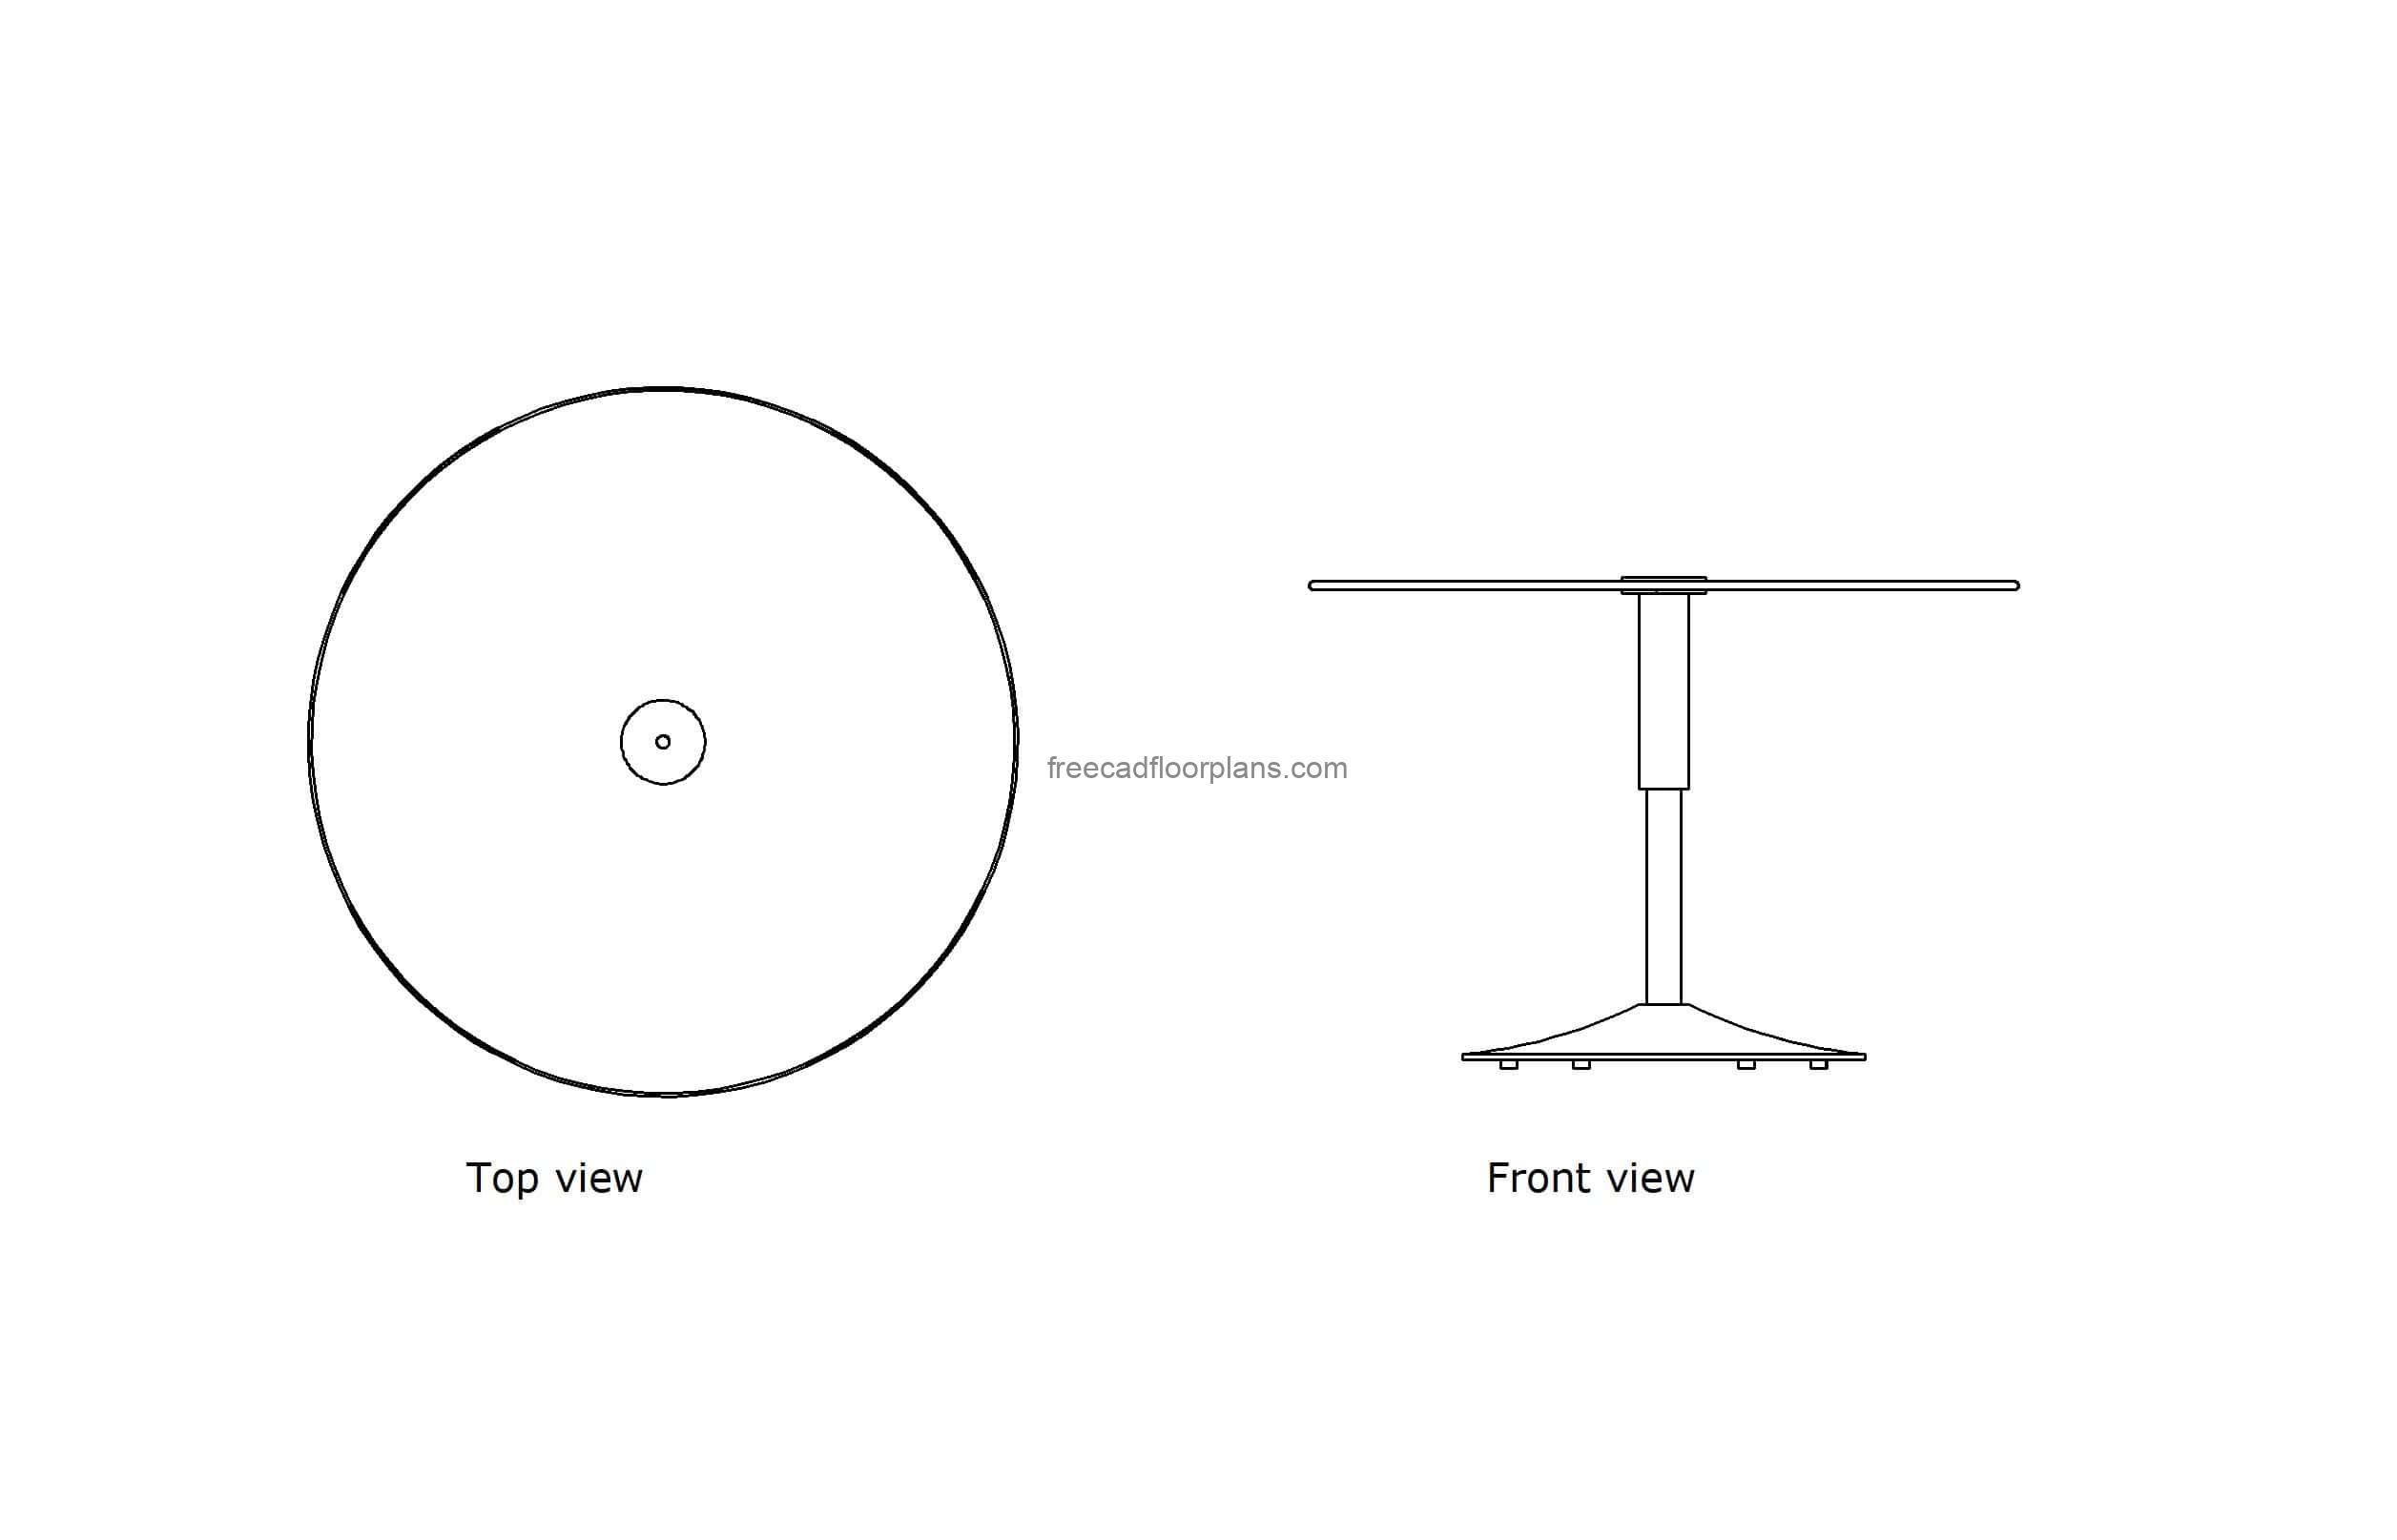 autocad drawing of an adjustable dining table, plan and elevation 2d views, dwg file free for download